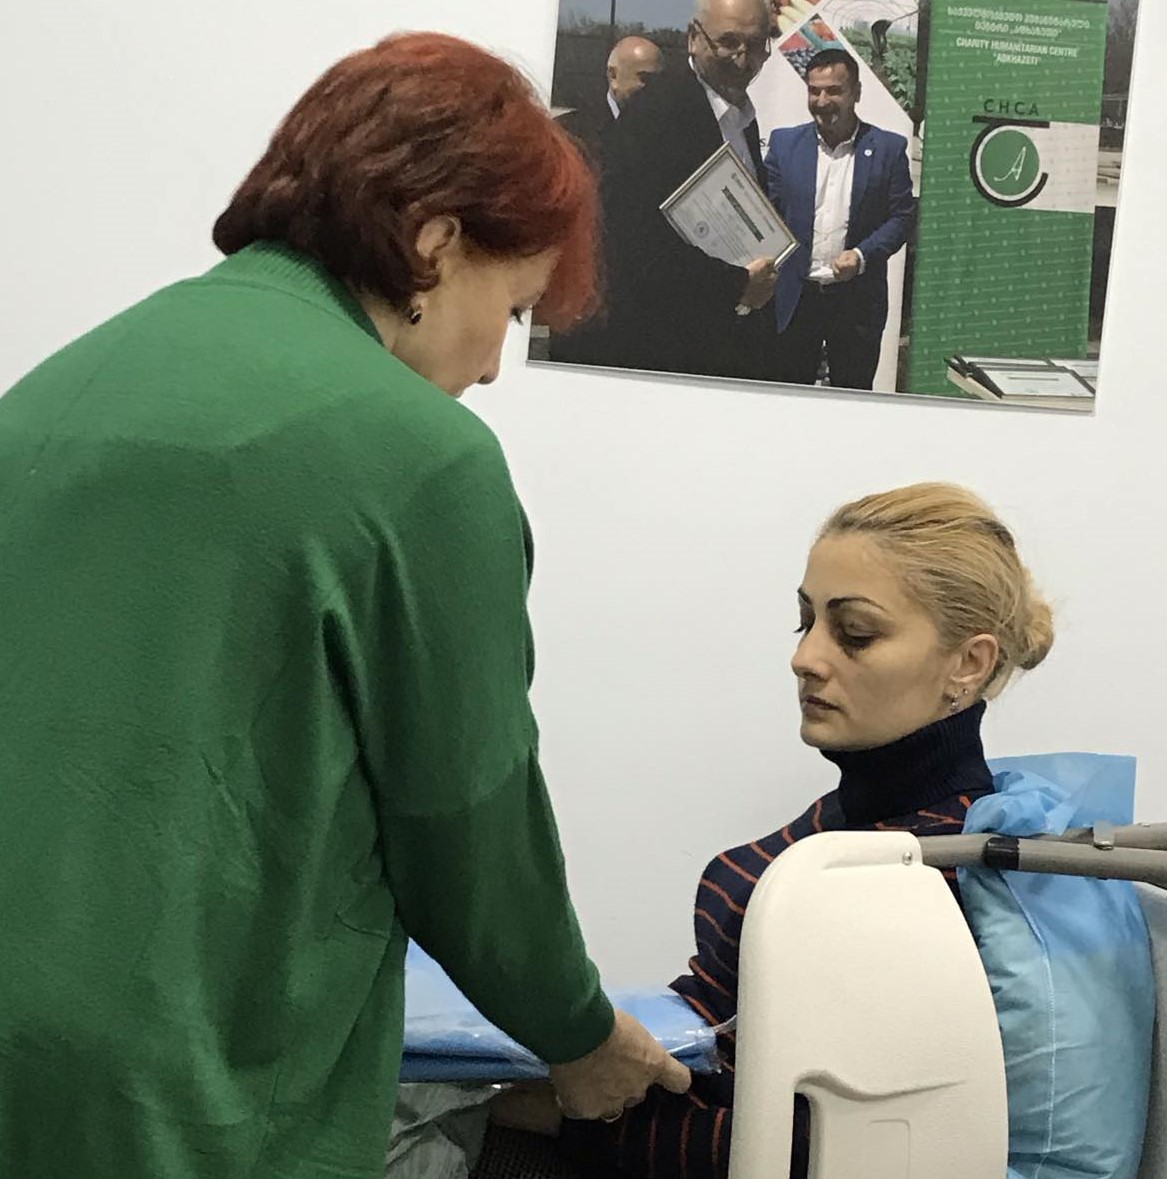 CHCA is gearing up to offer Homecare Services in Samegrelo